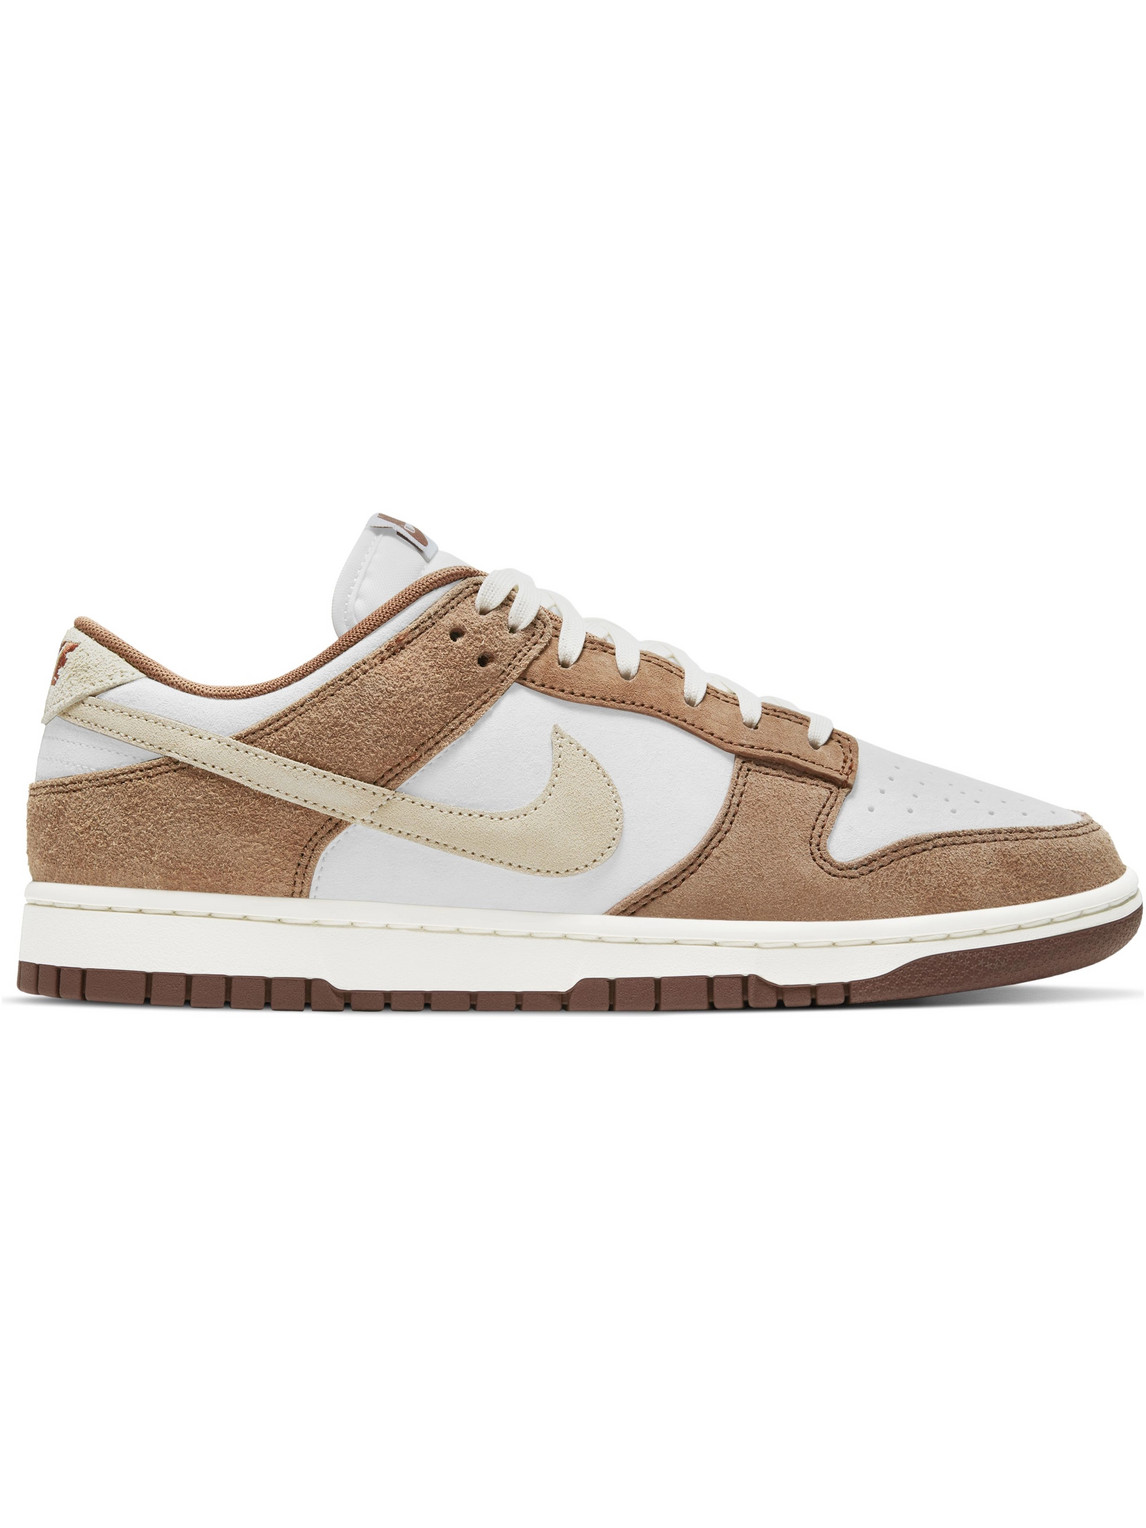 Dunk Low PRM Suede and Leather Sneakers